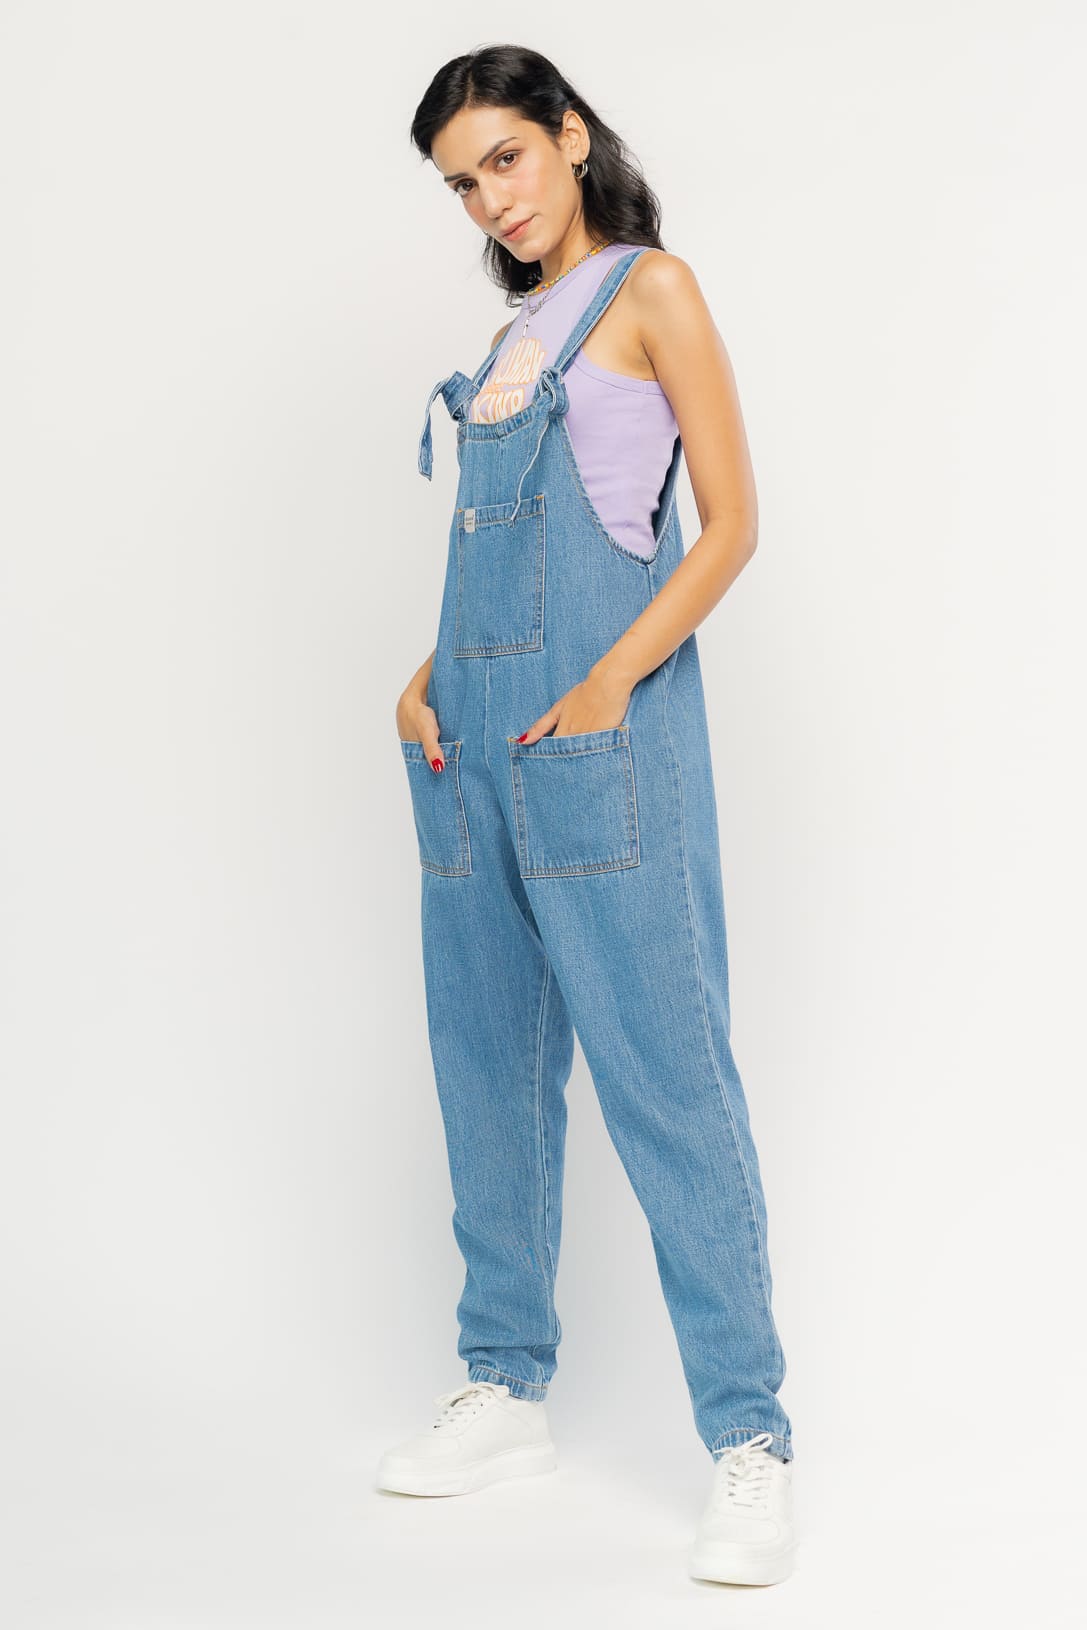 STYLESTONE Dungaree For Girls Casual Solid Denim Price in India - Buy  STYLESTONE Dungaree For Girls Casual Solid Denim online at Flipkart.com